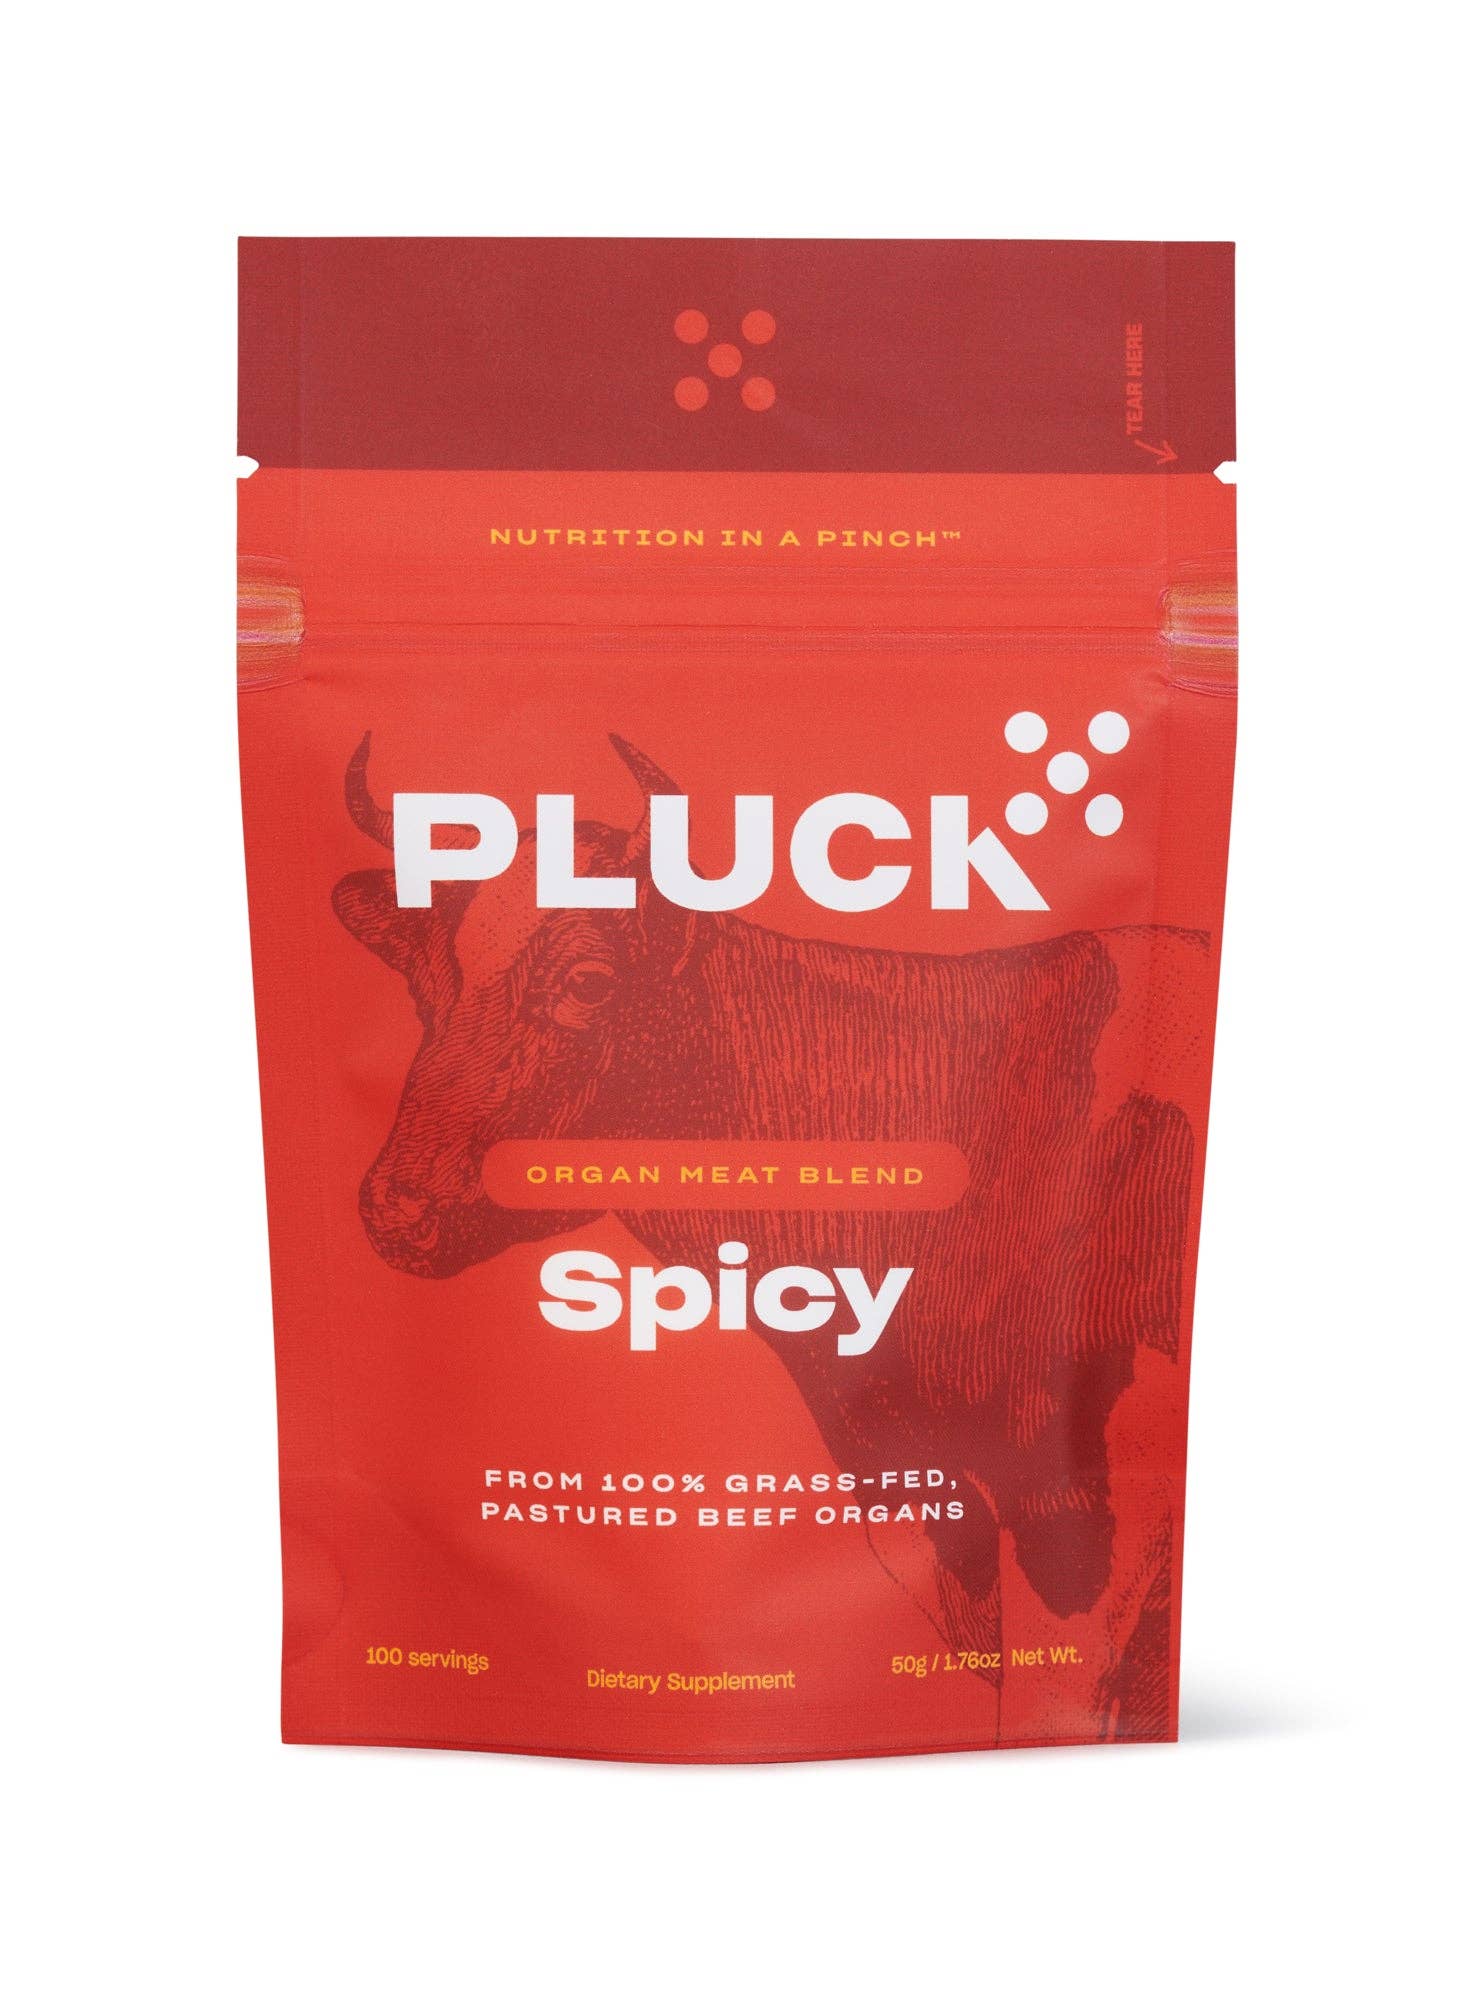 Pluck wholesale products